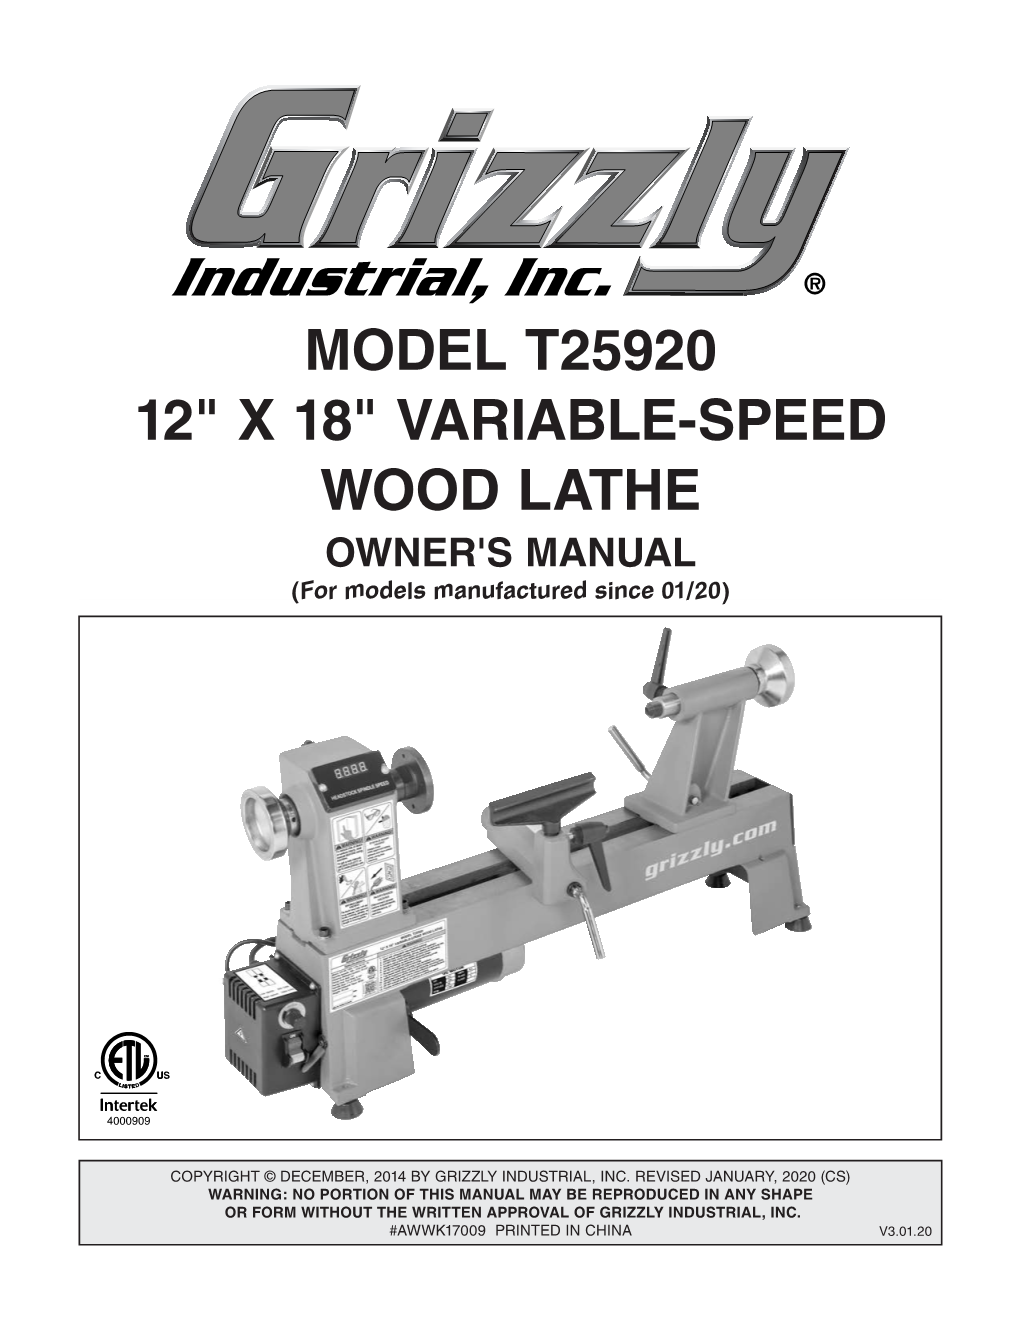 MODEL T25920 12" X 18" VARIABLE-SPEED WOOD LATHE OWNER's MANUAL (For Models Manufactured Since 01/20)